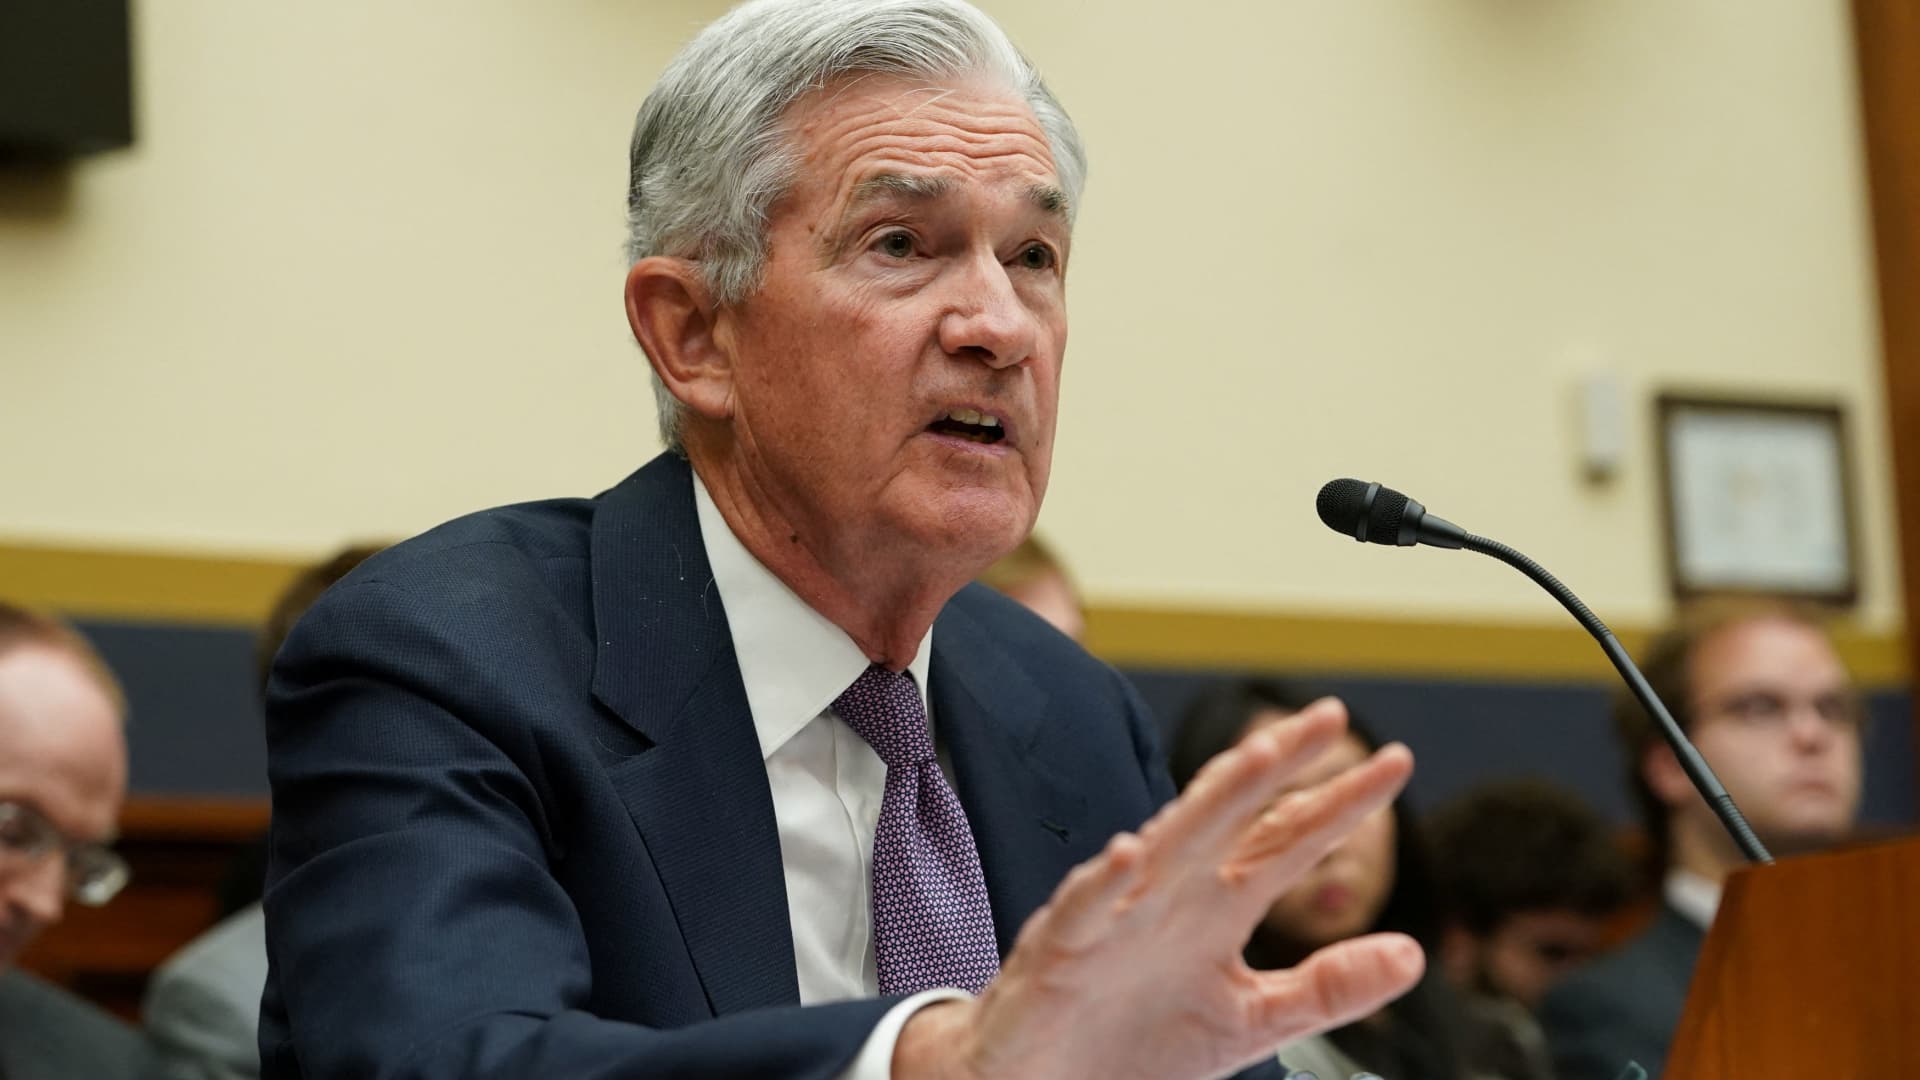 In just a few minutes this week, Powell changed everything on market’s view of interest rates